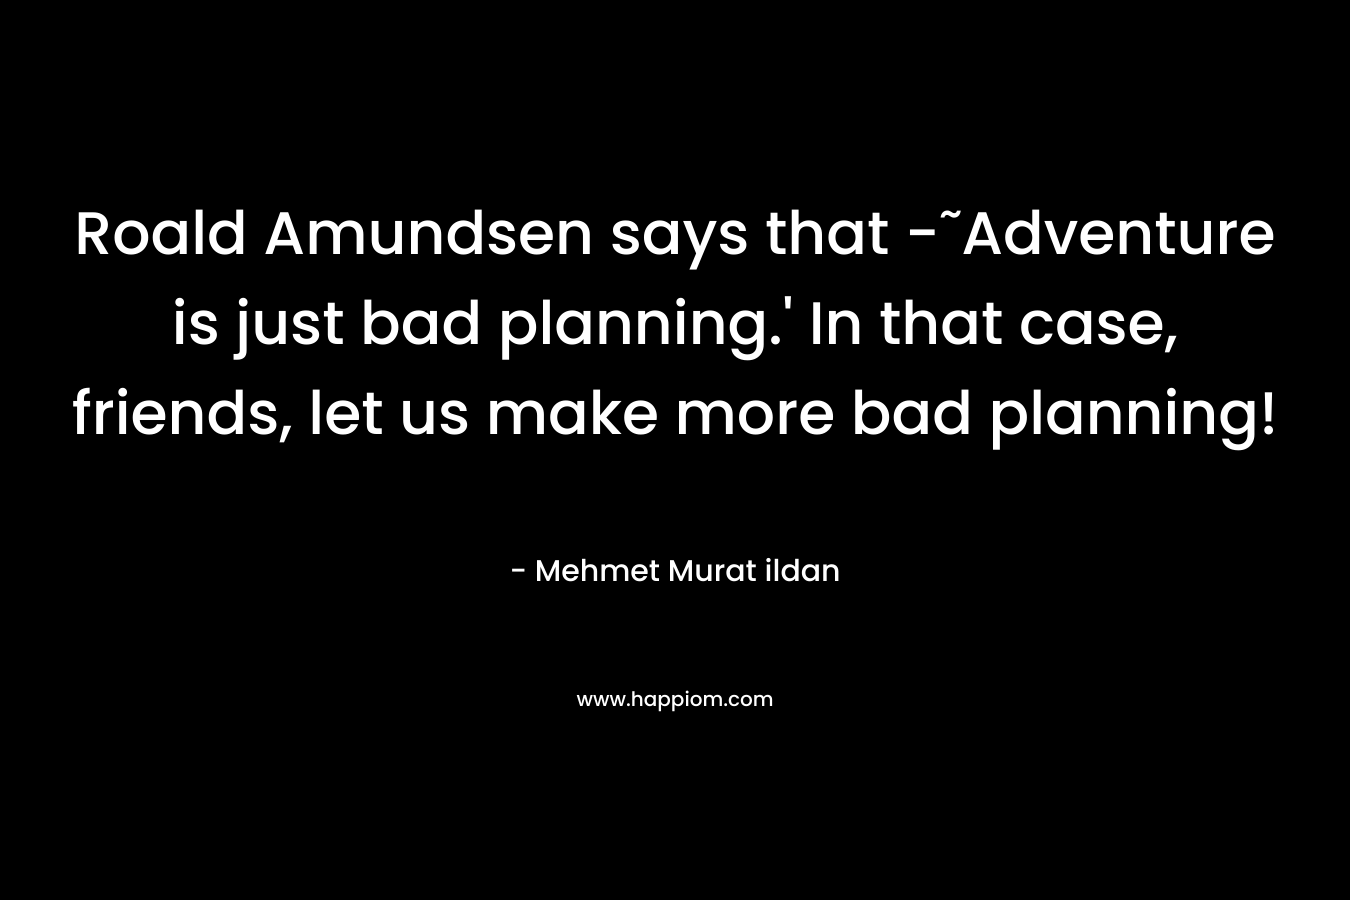 Roald Amundsen says that -˜Adventure is just bad planning.' In that case, friends, let us make more bad planning!